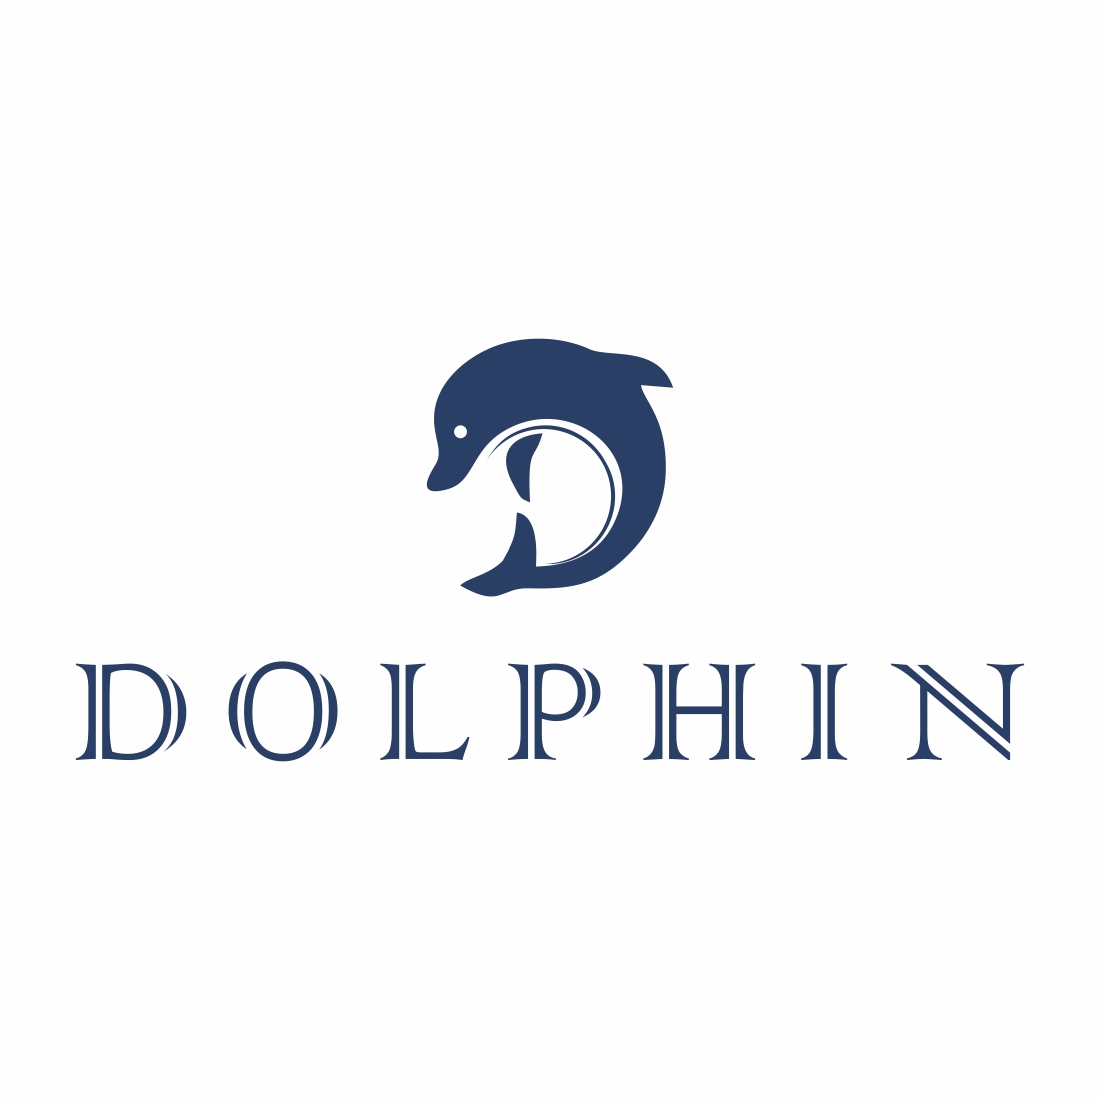 Dolphin logo with a combination of the letter D in dark blue preview image.